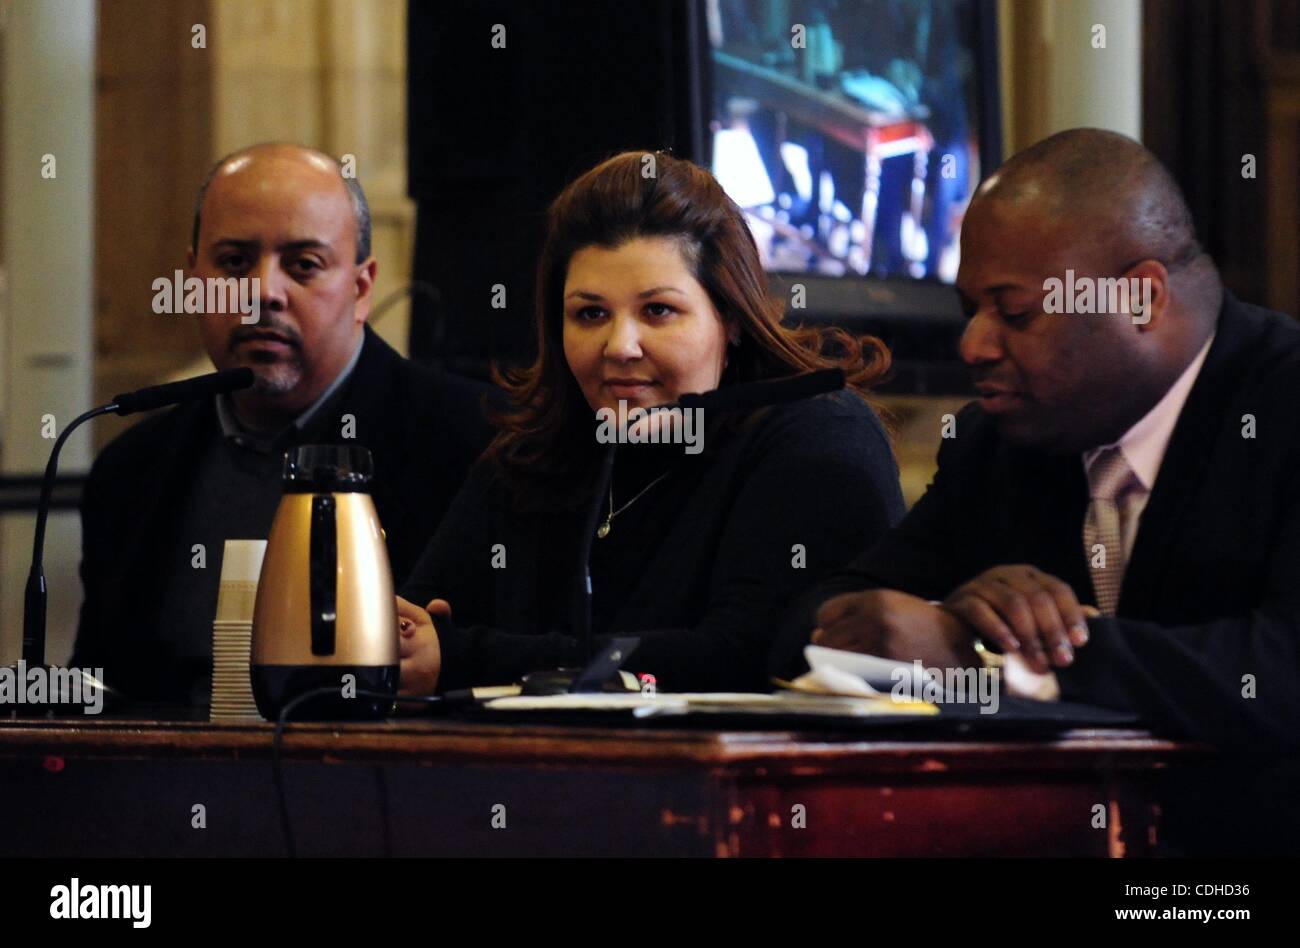 Feb. 3, 2011 - Manhattan, New York, U.S. - Local small business operators Nelson Eusabio (L) of Compare Supermarkets, beverage distributor Marlene Luganes-Bracho (C) and Mark Tannis (R) of Shopper's World testify at the City Council hearing on the proposed New York City Wal-Mart. (Credit Image: © Br Stock Photo